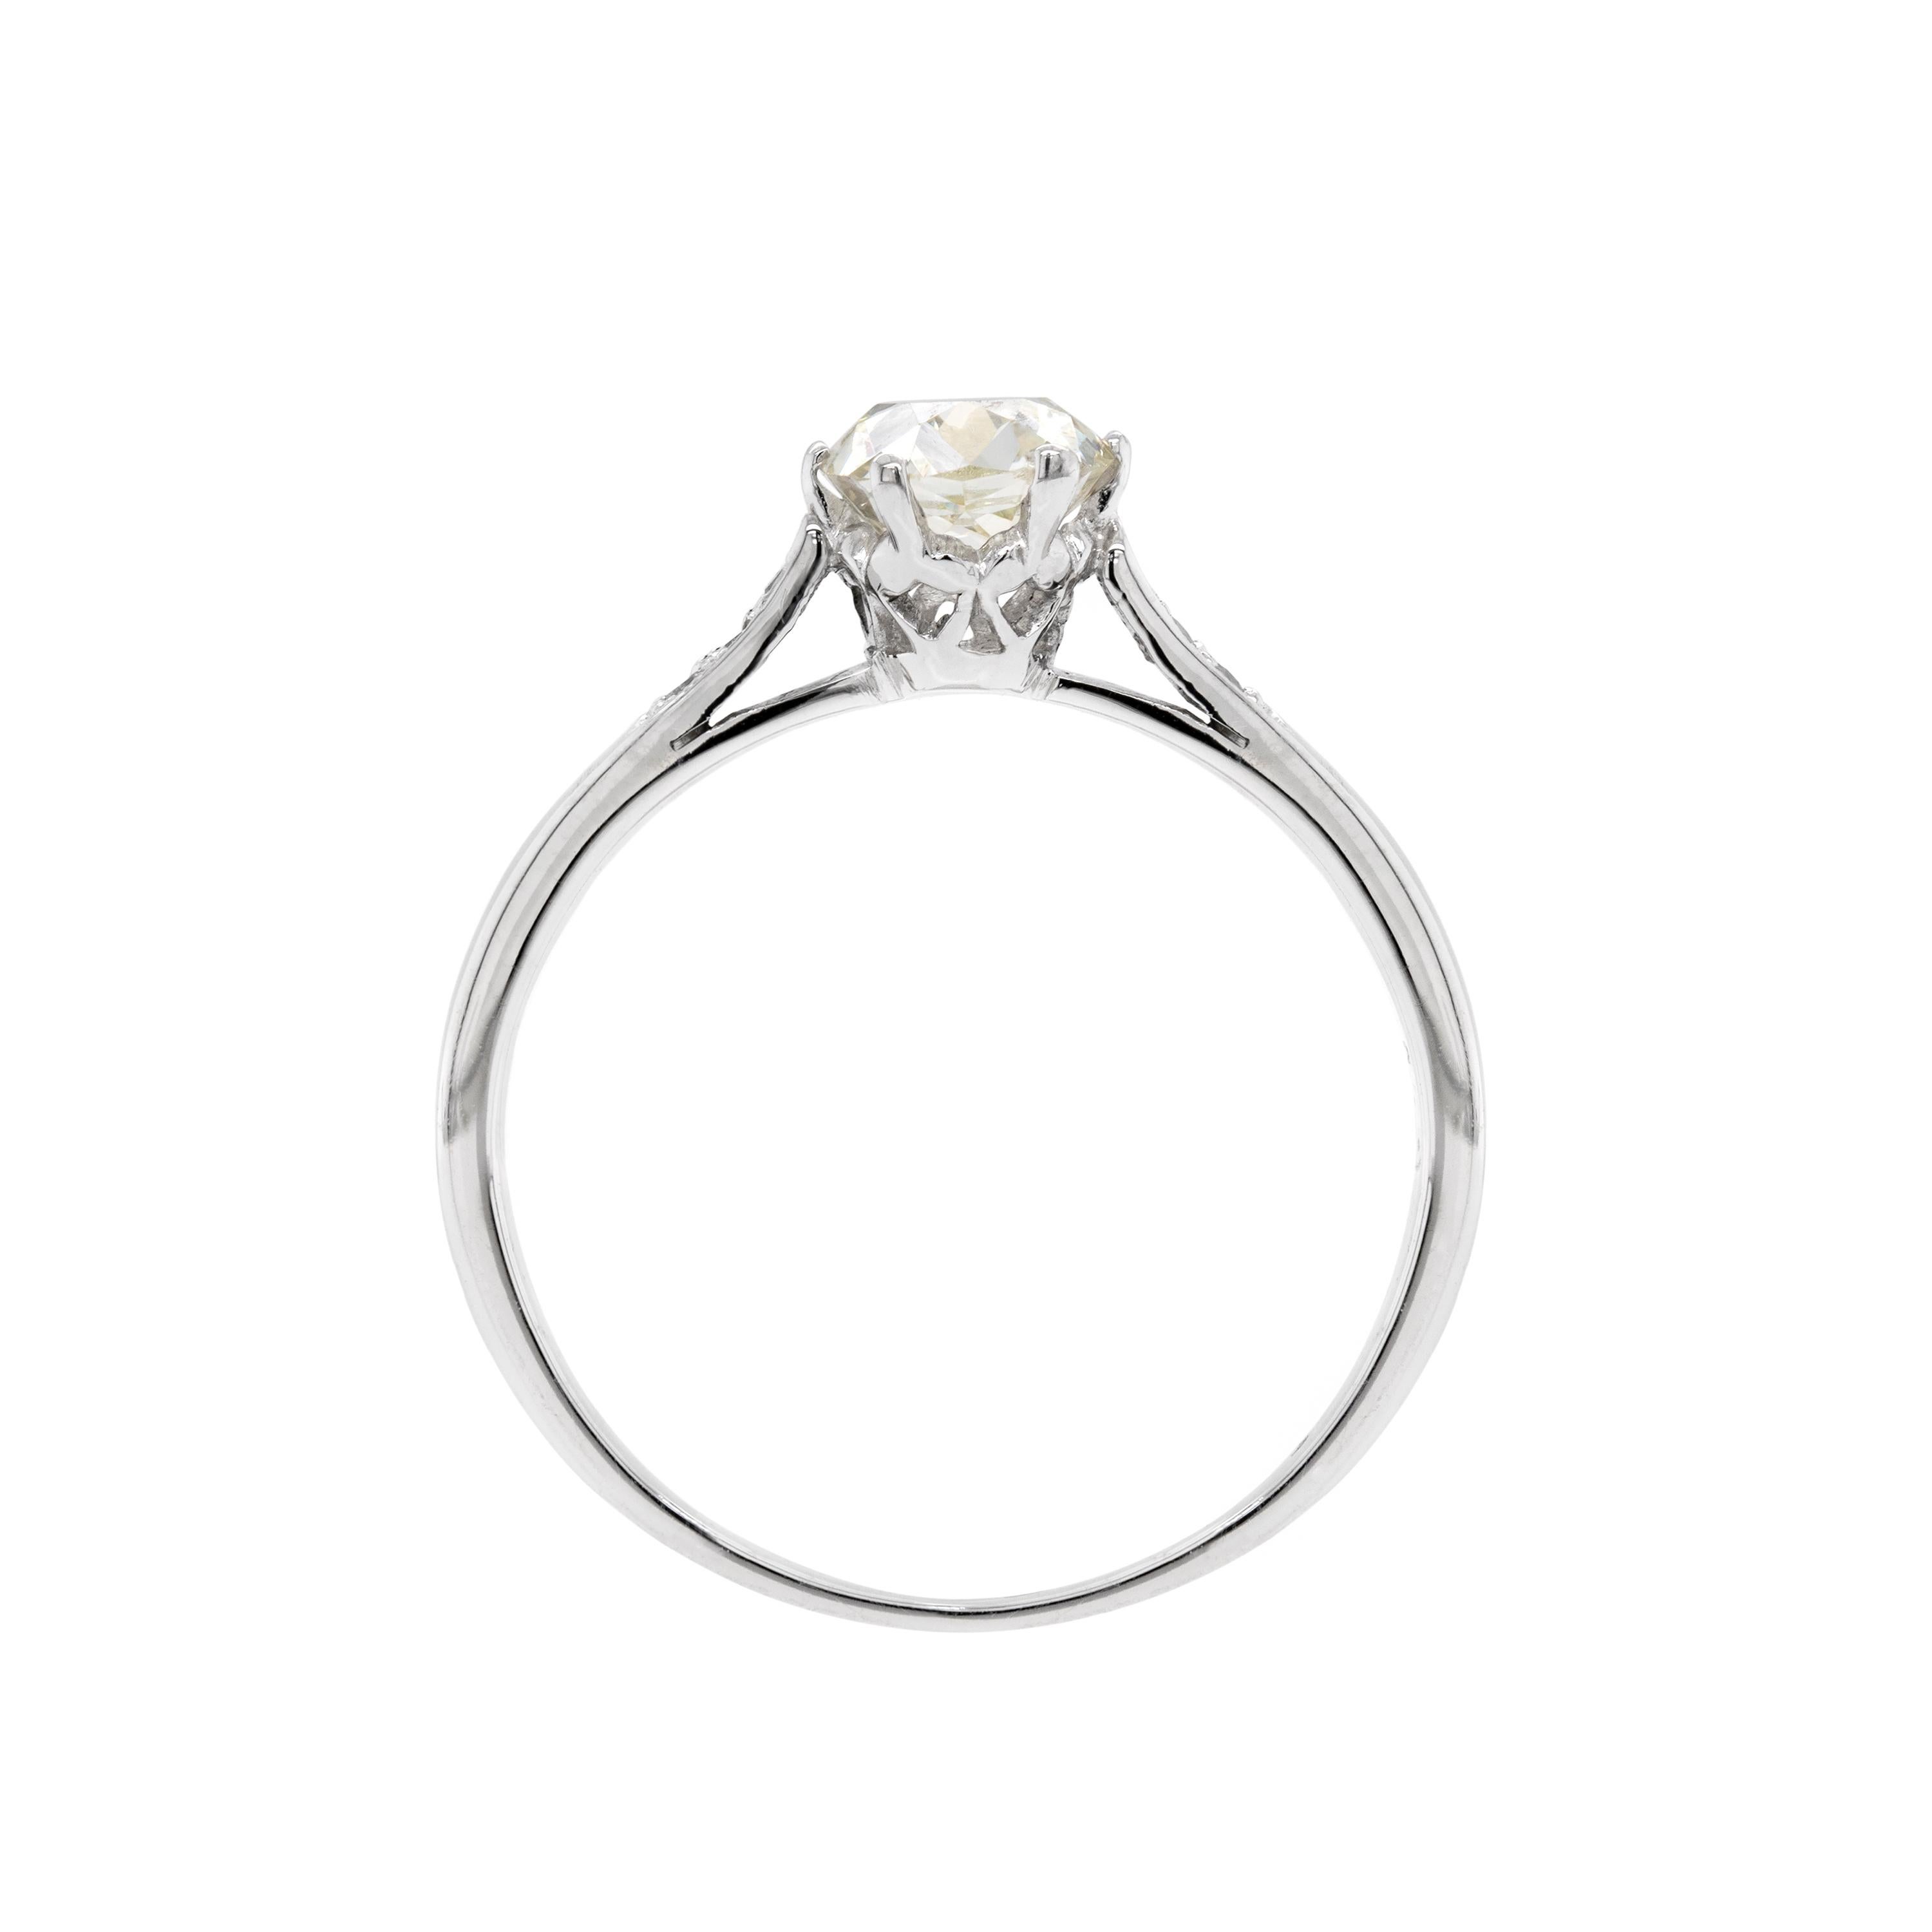 Late Victorian 1.07 Carat Old Mine Cut Diamond Platinum Engagement Ring For Sale